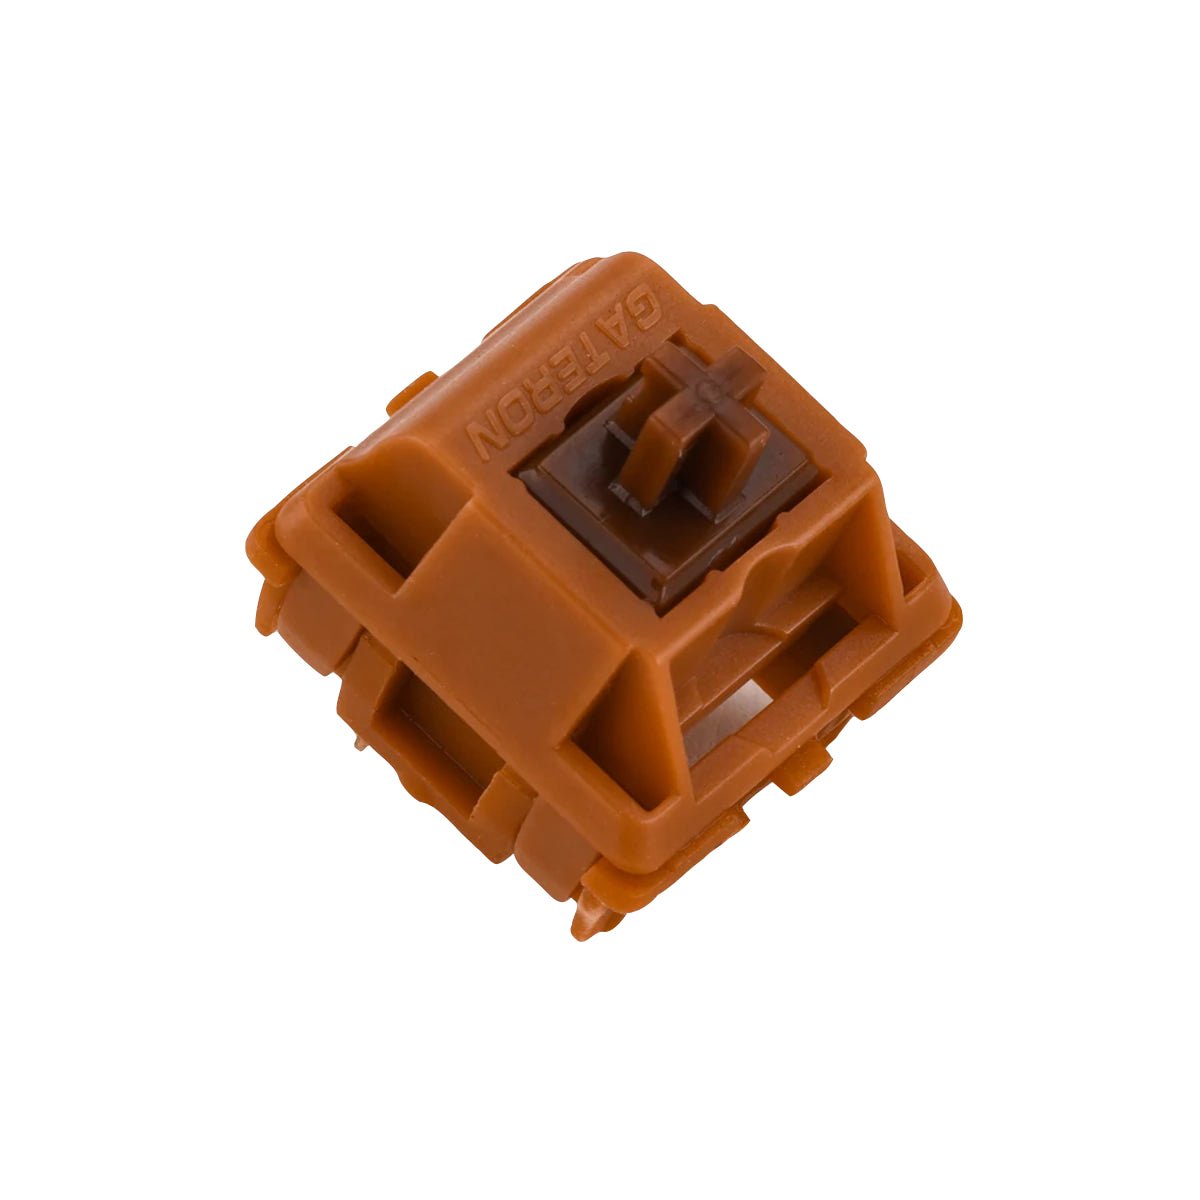 KBD Fans Gateron Caps V2 Tactile Switches - Gold Brown - Store 974 | ستور ٩٧٤